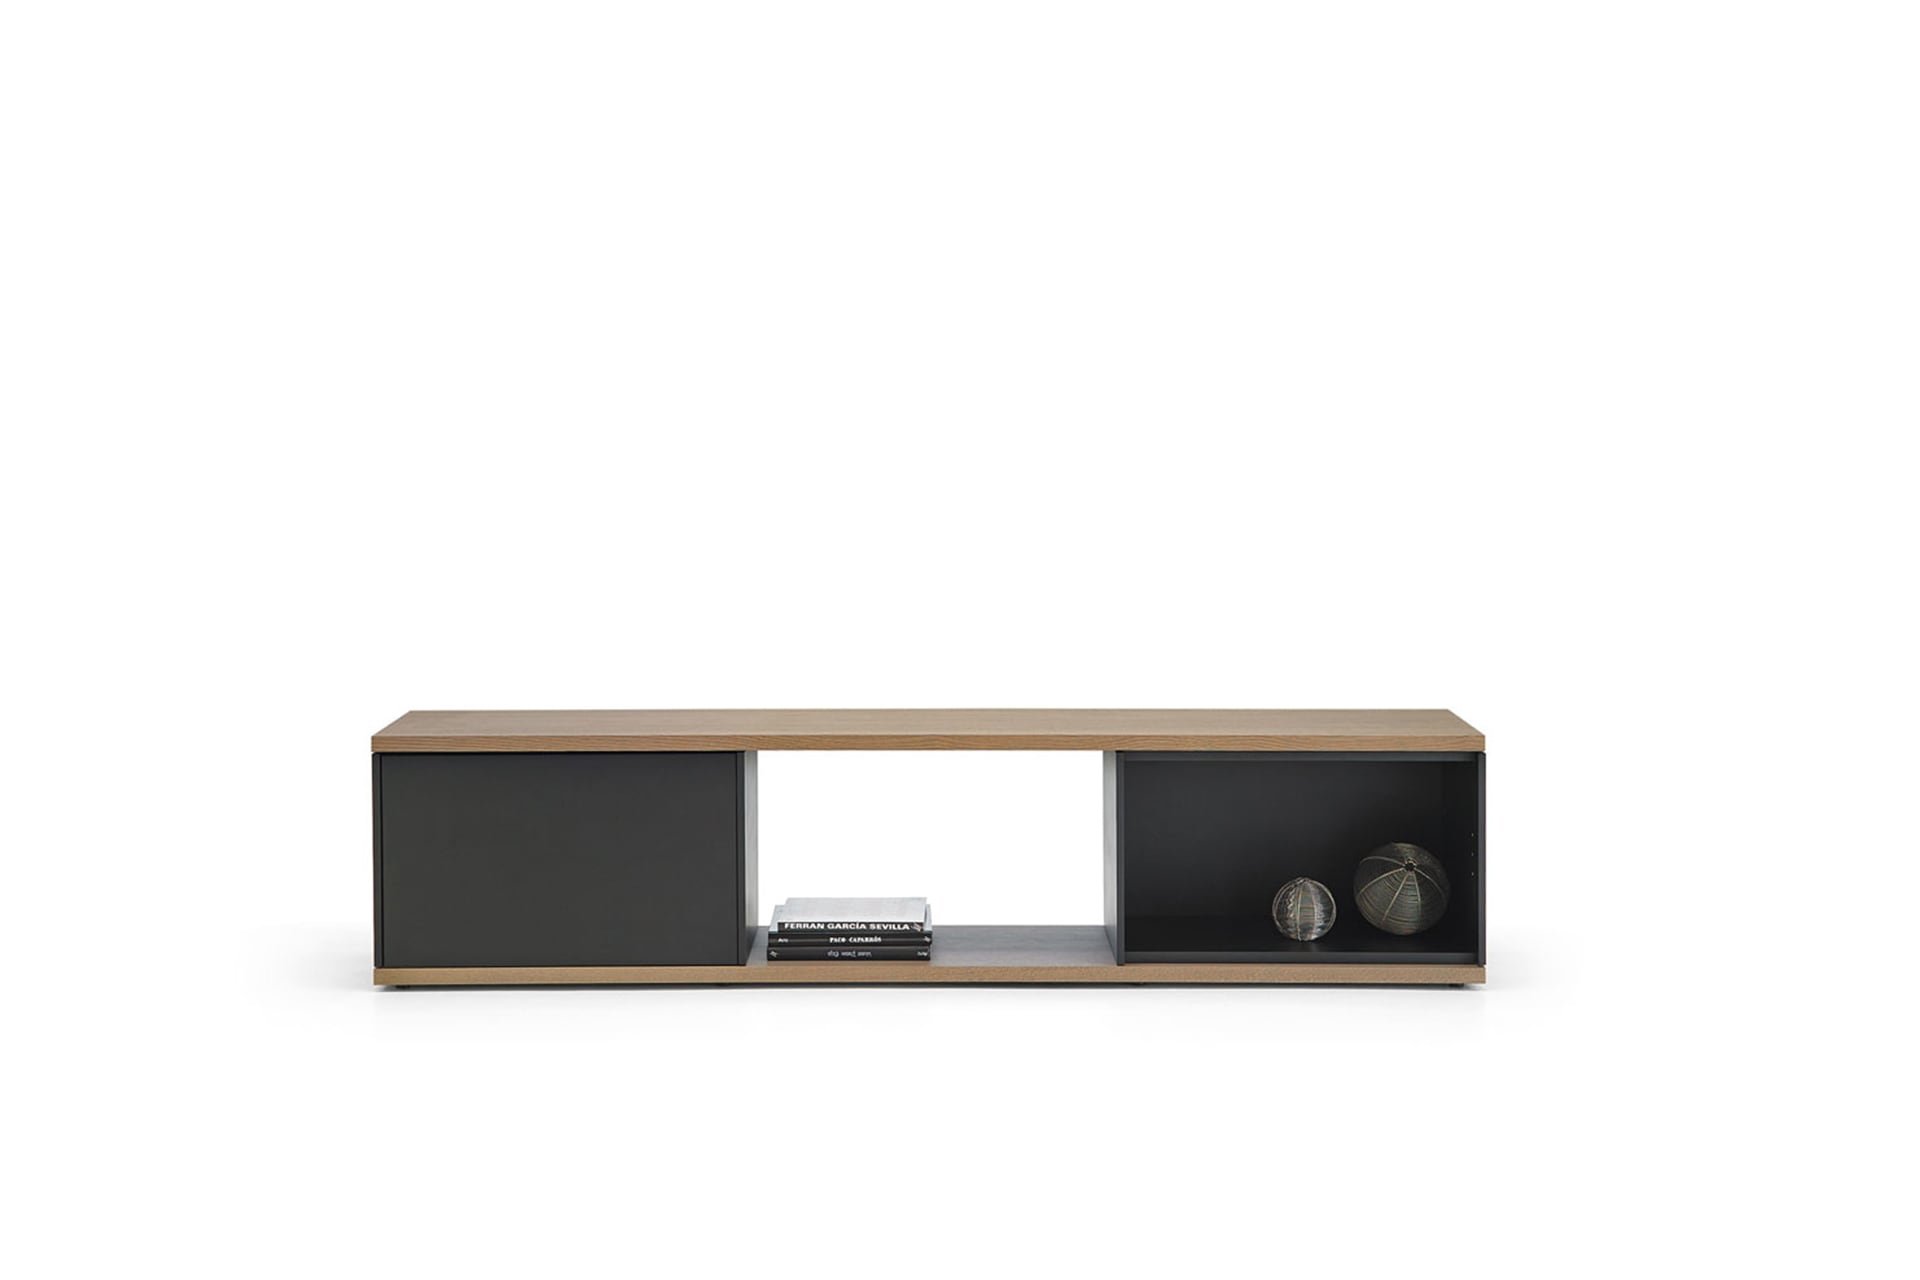 Slats Sideboard from Punt Mobles, designed by Marc Krusin